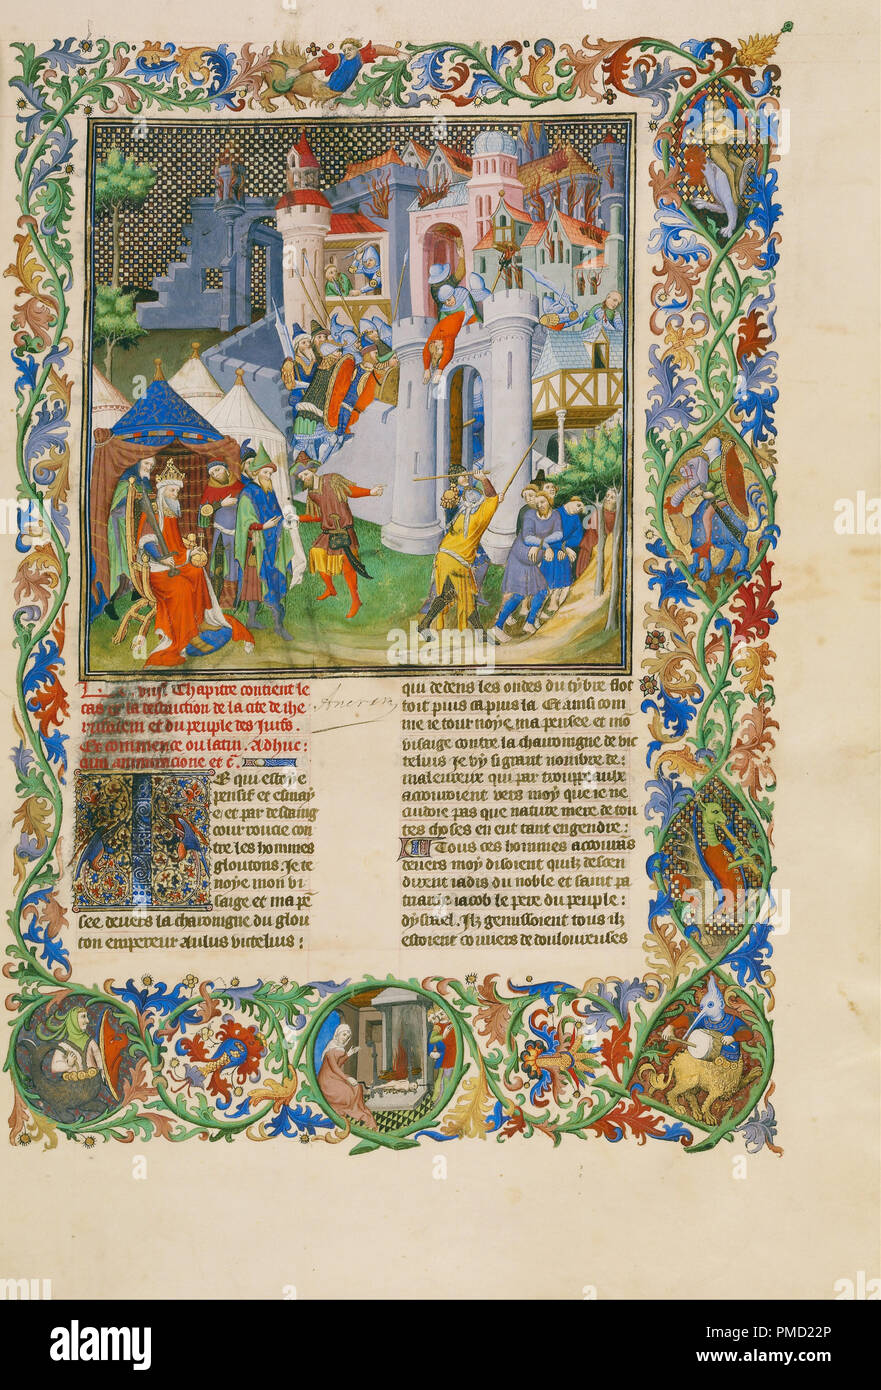 The Destruction of Jerusalem. Date/Period: Ca. 1413 - 1415. Folio. Tempera colors, gold leaf, gold paint, and ink on parchment. Height: 420 mm (16.53 in); Width: 296 mm (11.65 in). Author: UNKNOWN. Stock Photo